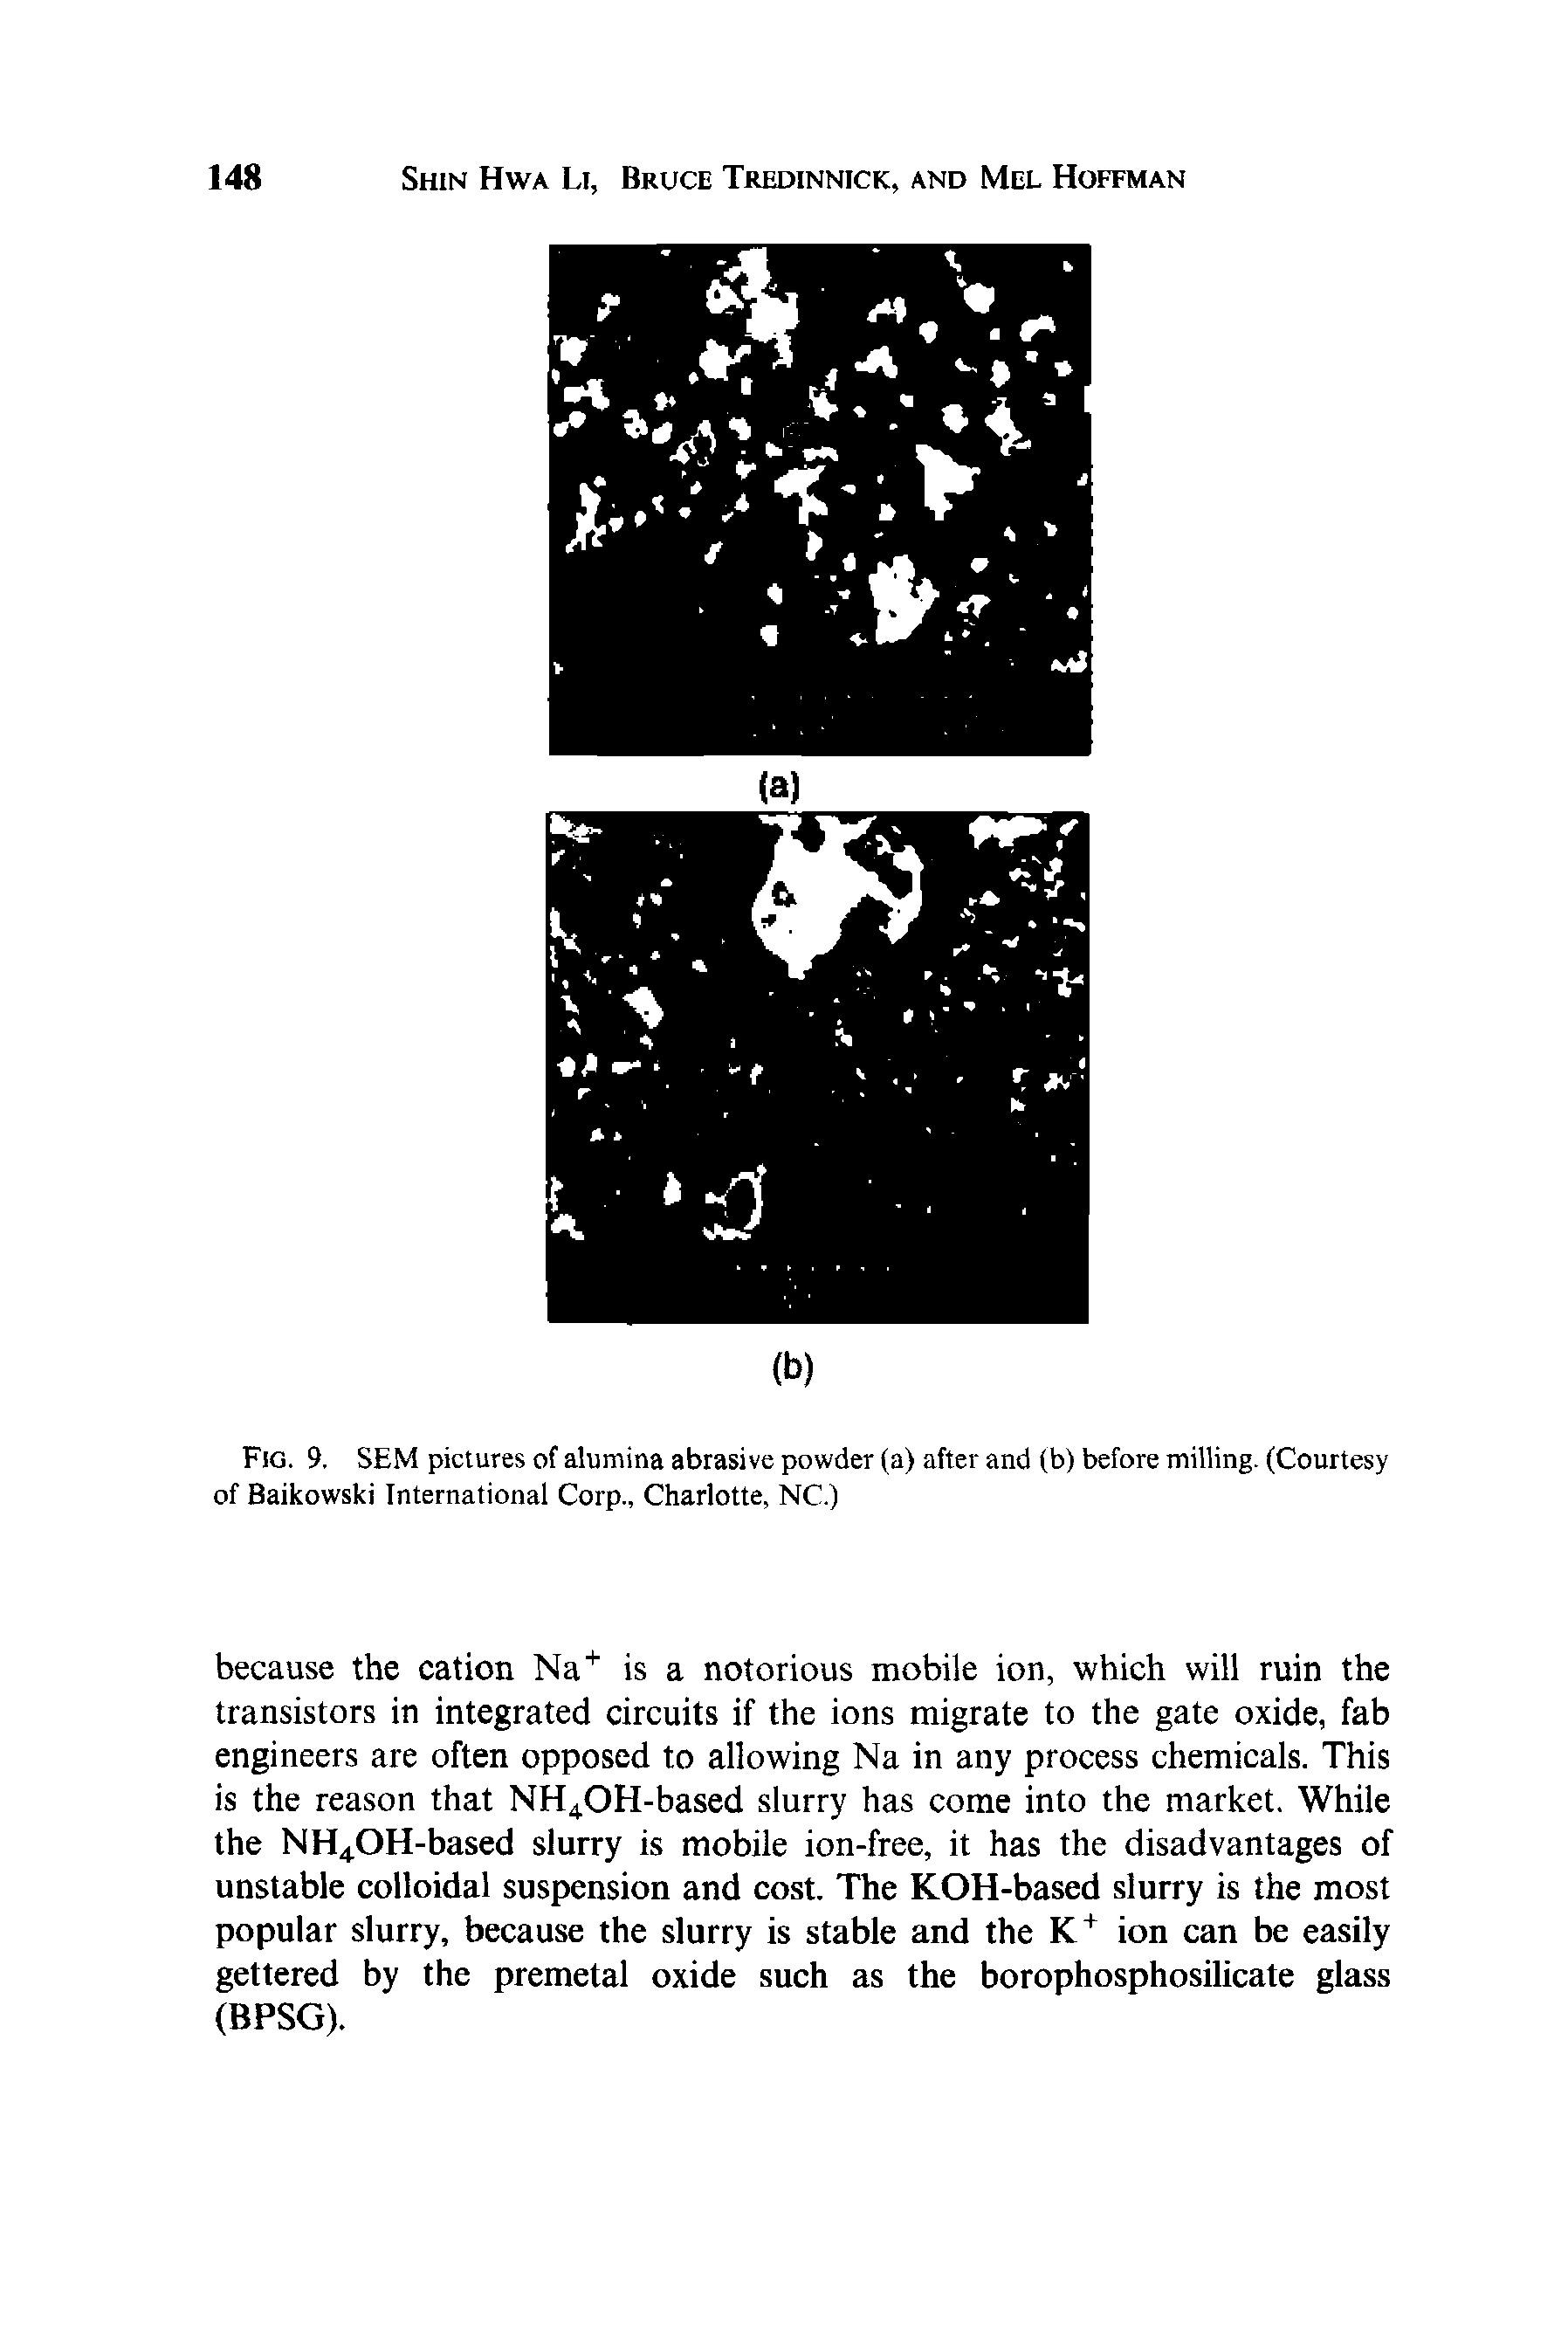 Fig. 9. SEM pictures of alumina abrasive powder (a) after and (b) before milling. (Courtesy of Baikowski International Corp., Charlotte, NC.)...